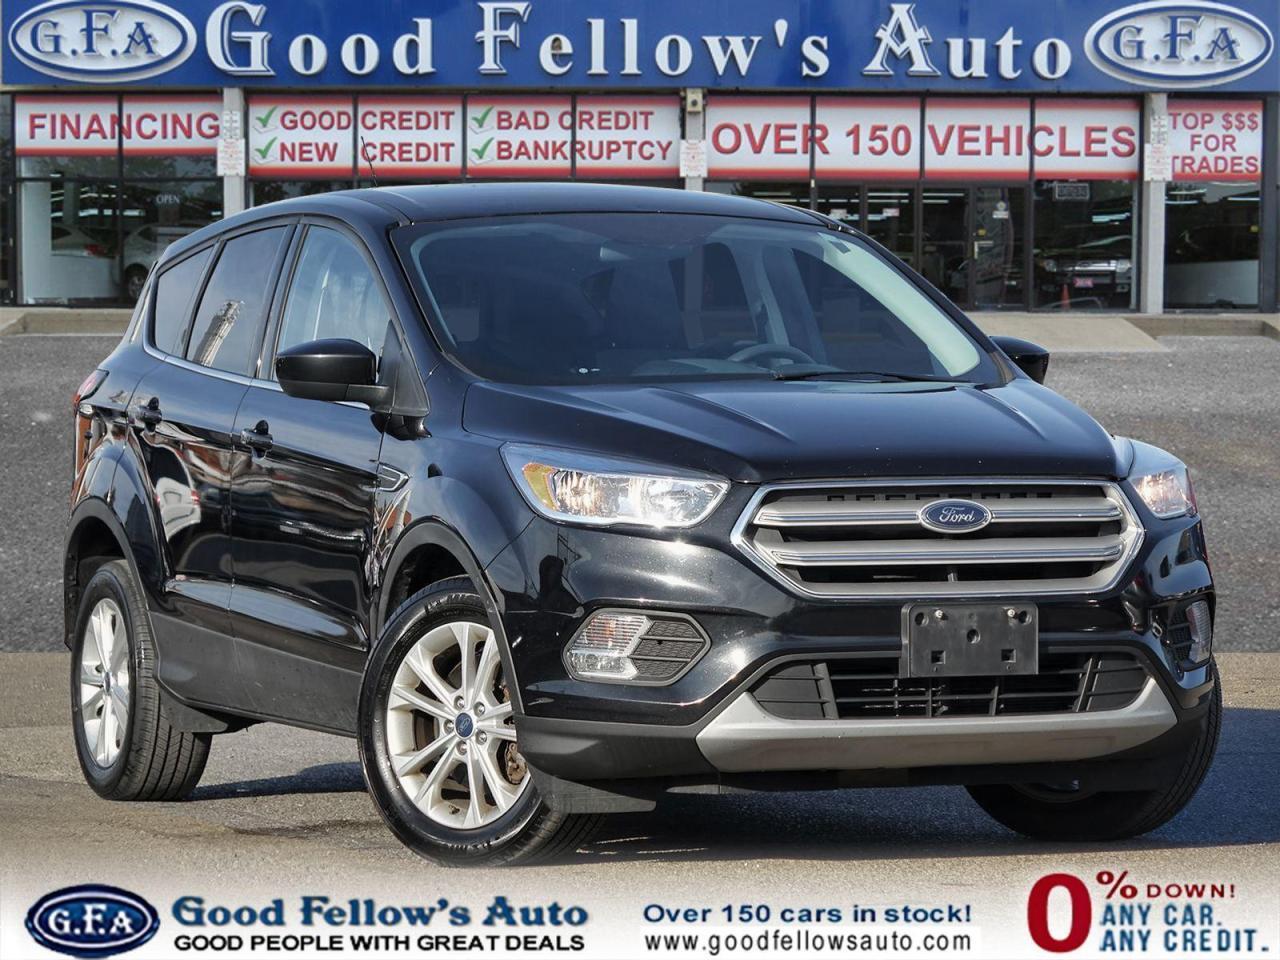 2019 Ford Escape SE MODEL, AWD, REARVIEW CAMERA, HEATED SEATS, POWE